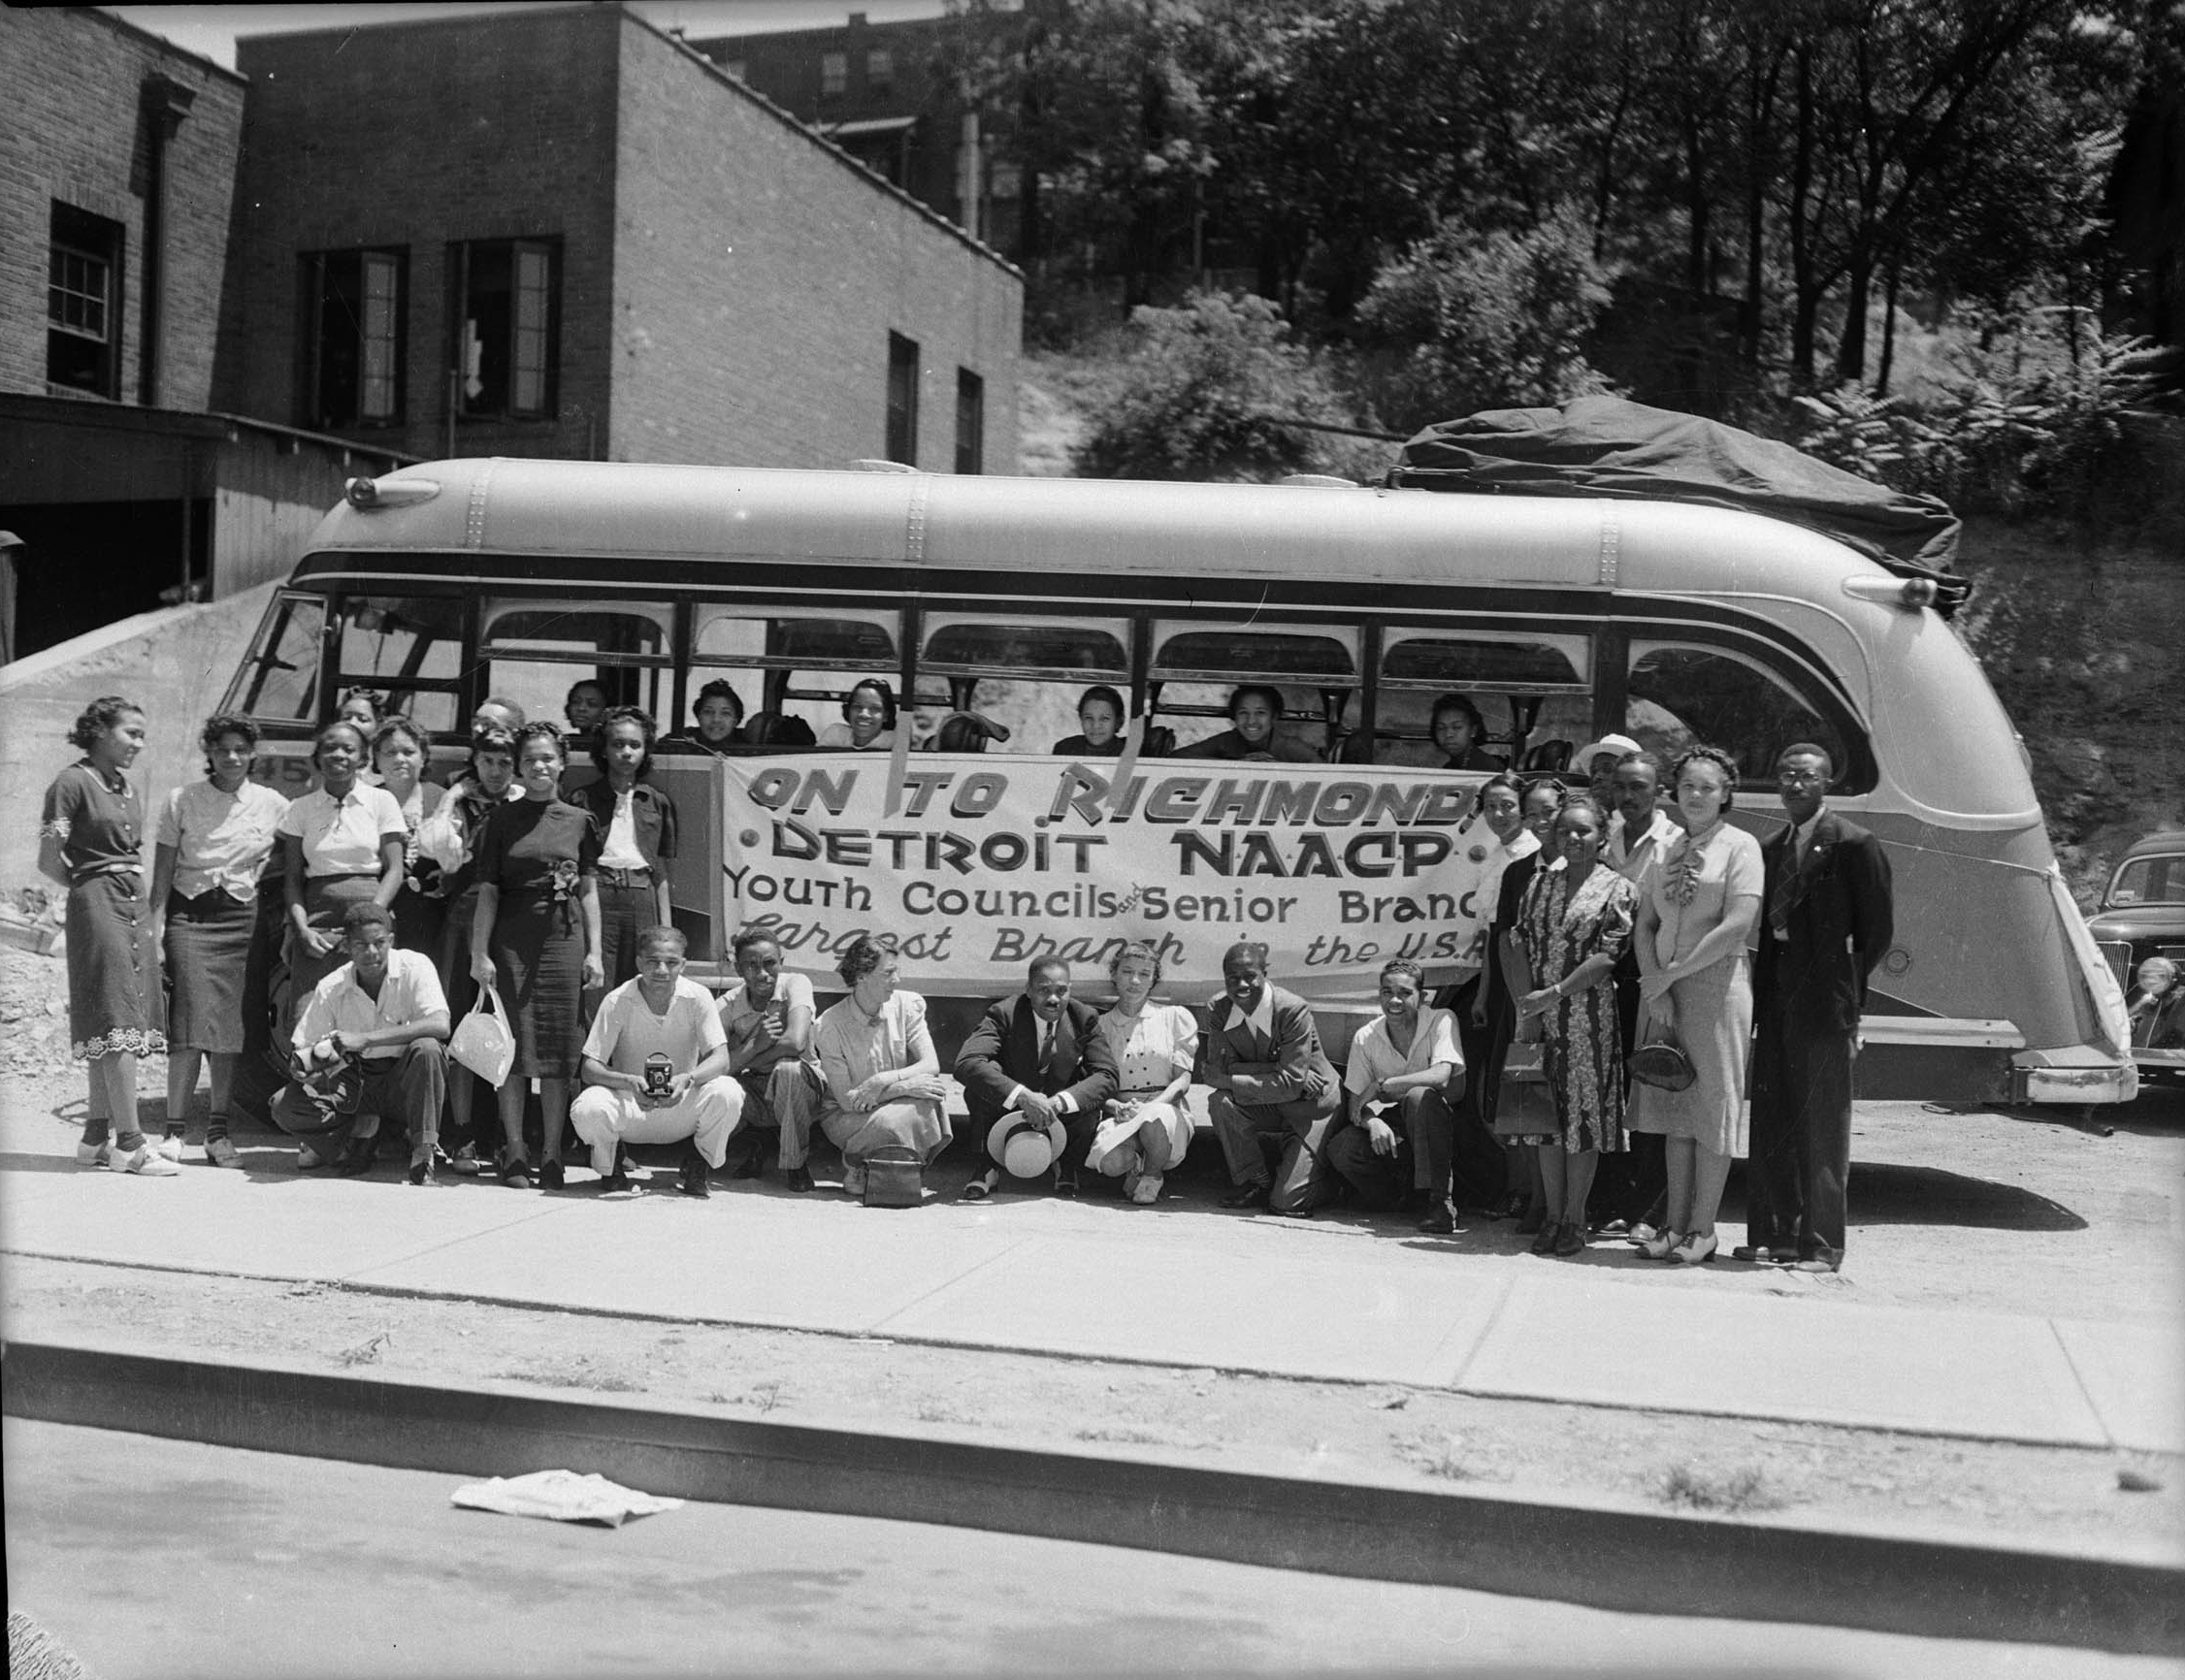 Charles "Teenie" Harris Exhibition Image depicting Men and women gathered in and around bus with banner reading On To Richmond, Detroit NAACP, Youth Councils and Senior Branch, Largest Branch in the USA